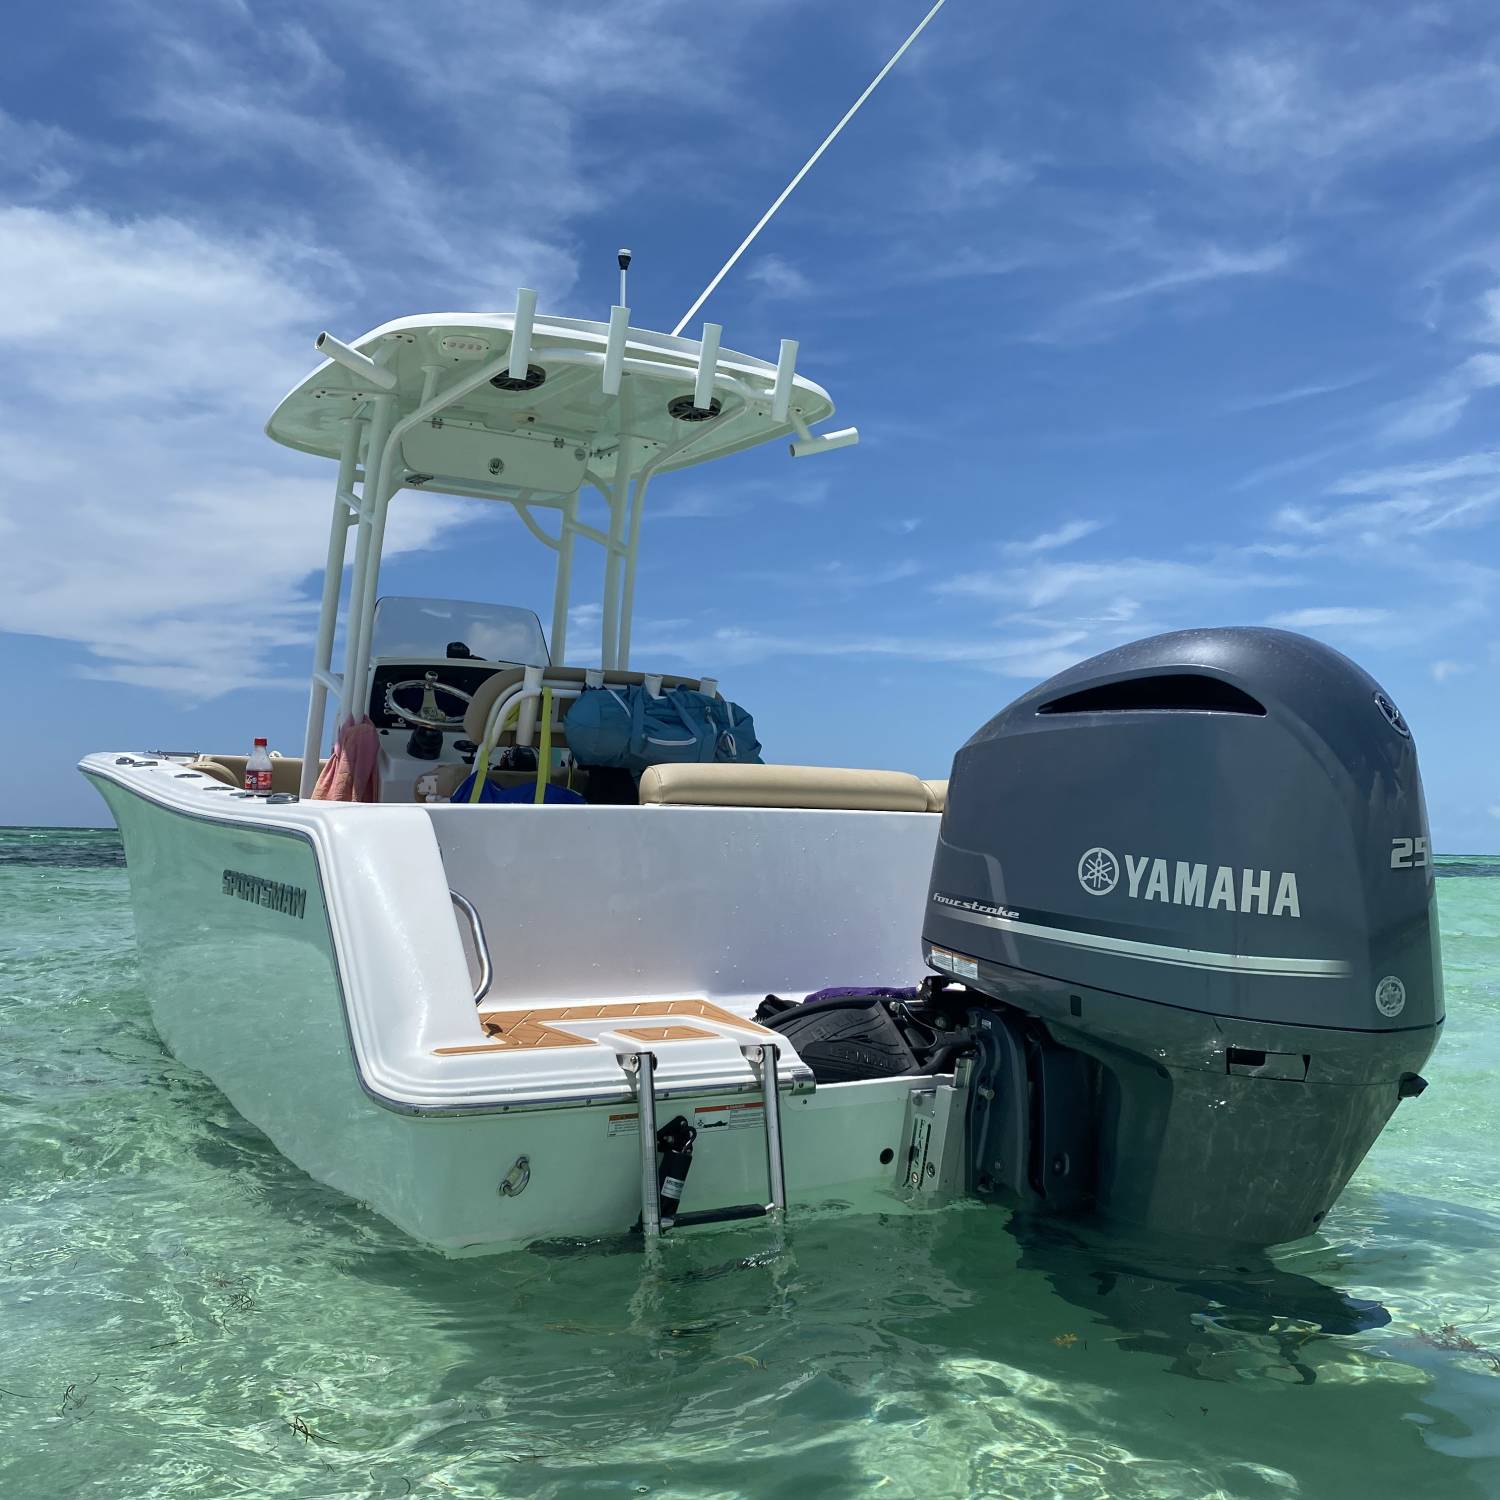 Title: At the Sandbar - On board their Sportsman Heritage 231 Center Console - Location: Bahia Honda. Participating in the Photo Contest #SportsmanAugust2021